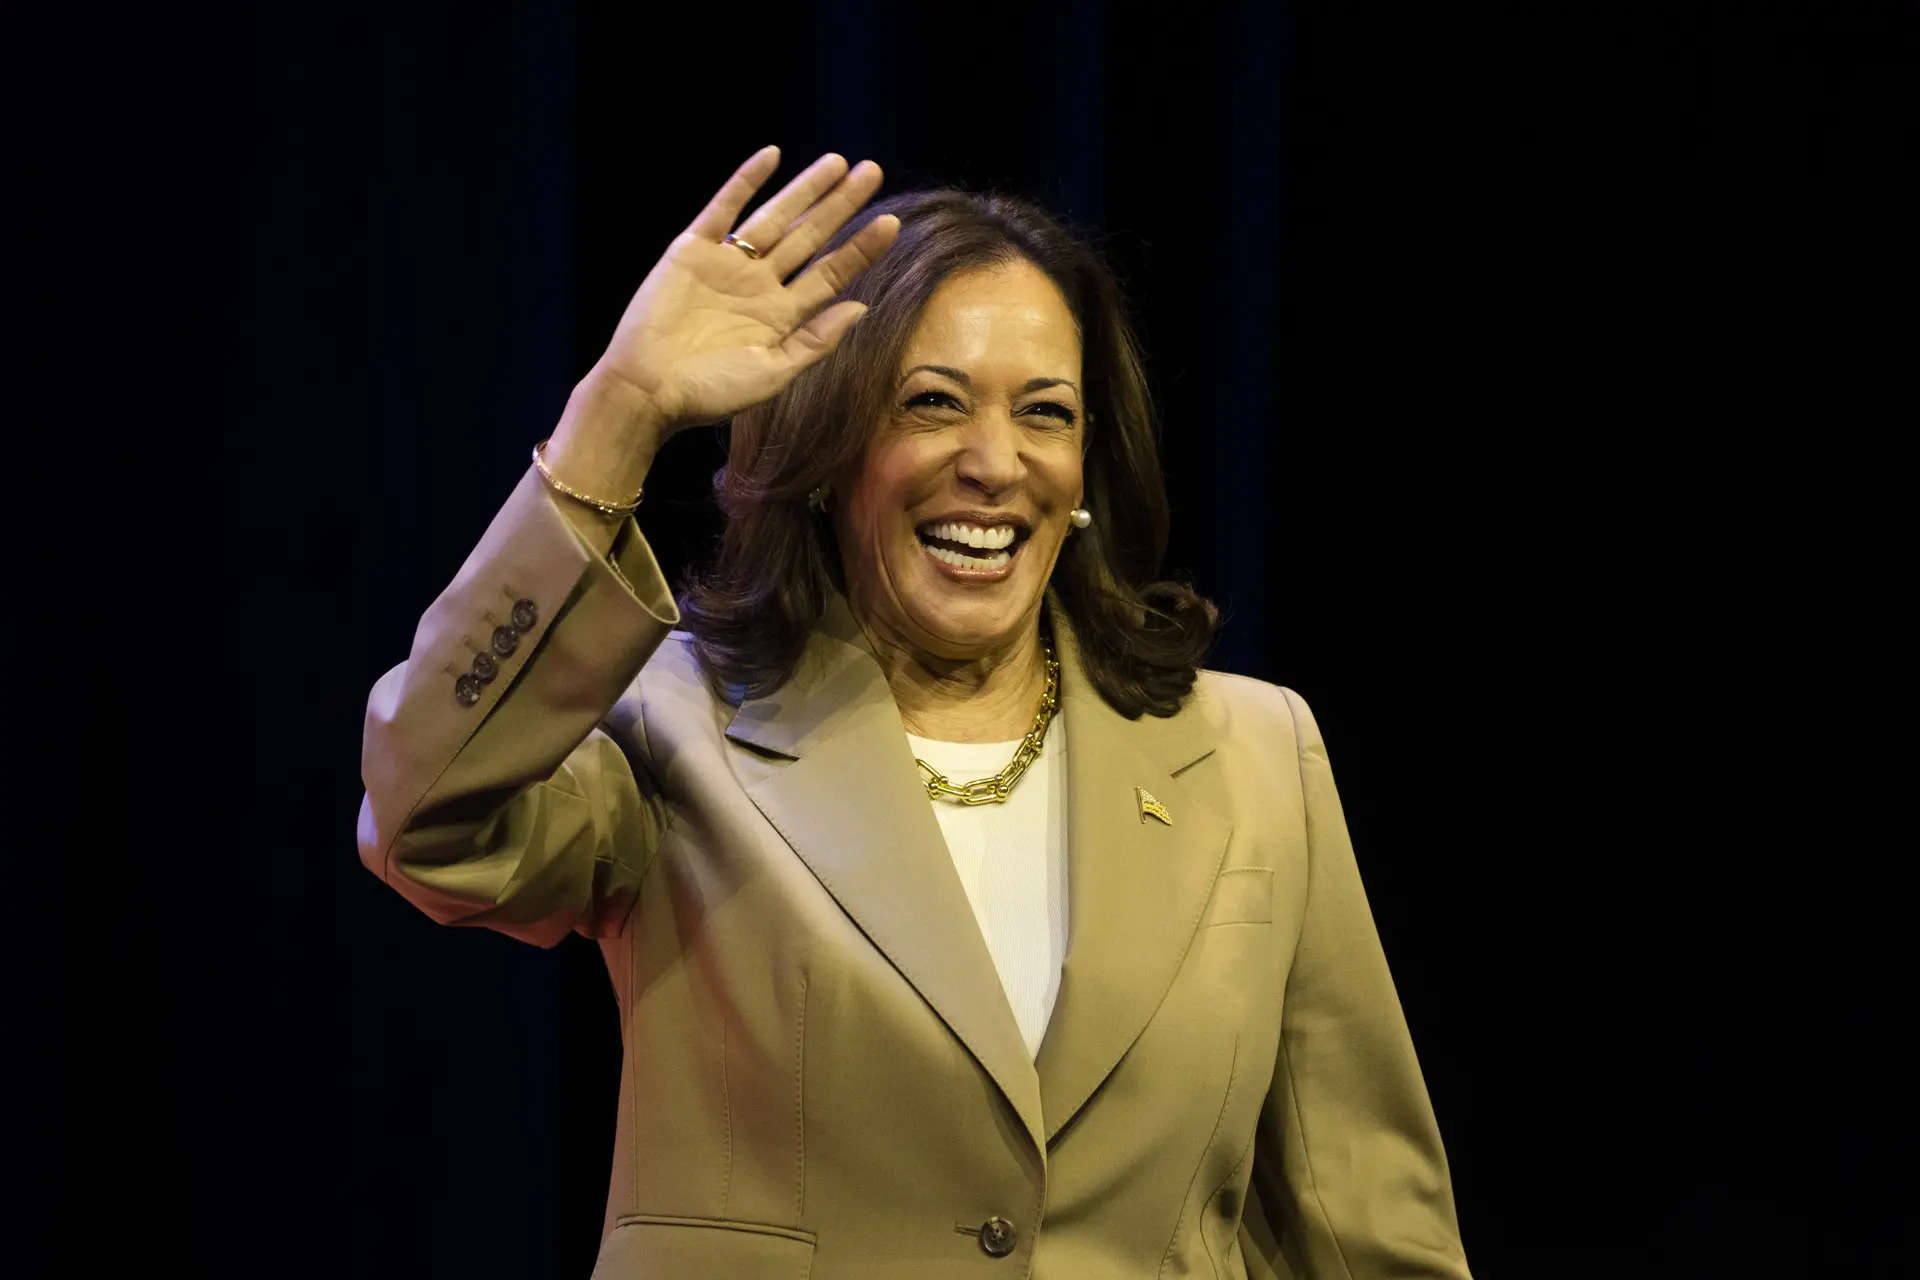 Kamala Harris has energized Democratic base, says a confidential memo from Trump campaign 